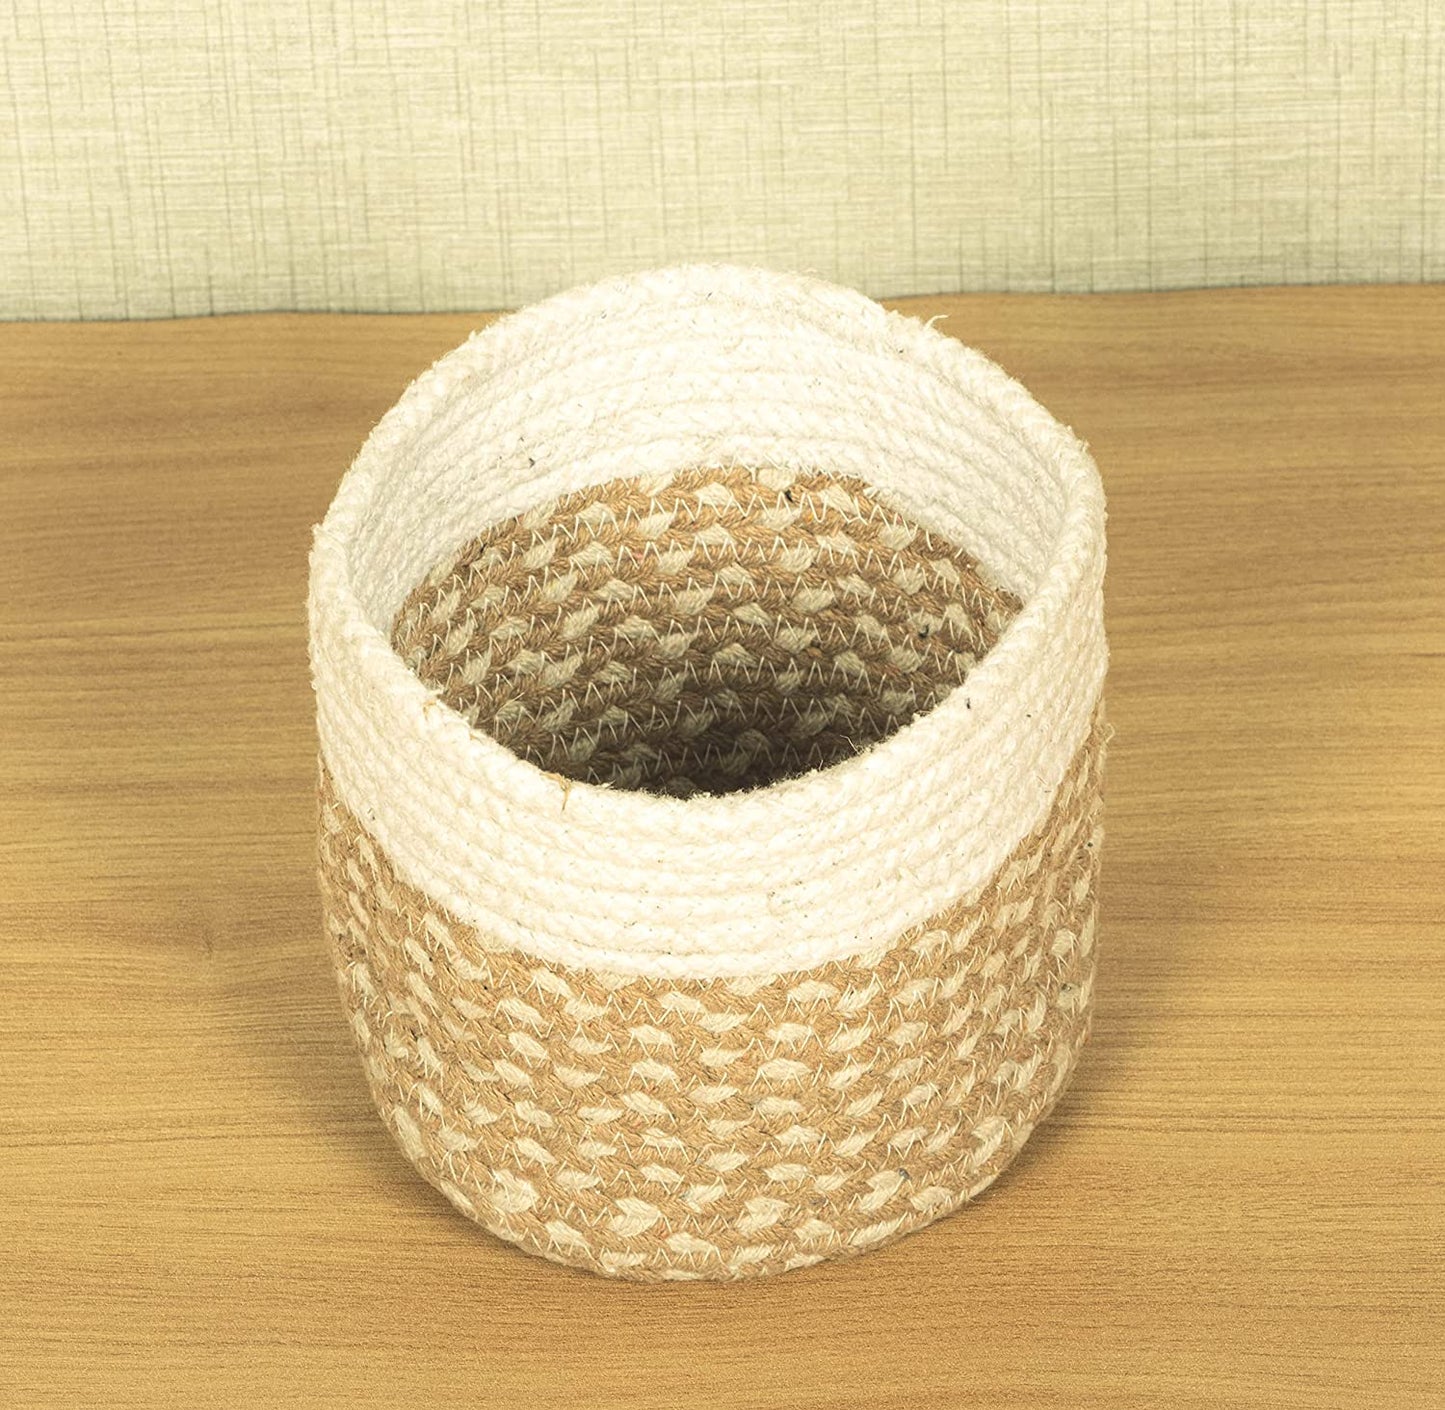 TIB The Intellect Bazaar jute Planter Pots/Handcrafted Storage Basket, Multi-Purpose use for Living Room (12x12 Inches)Beige and White Color